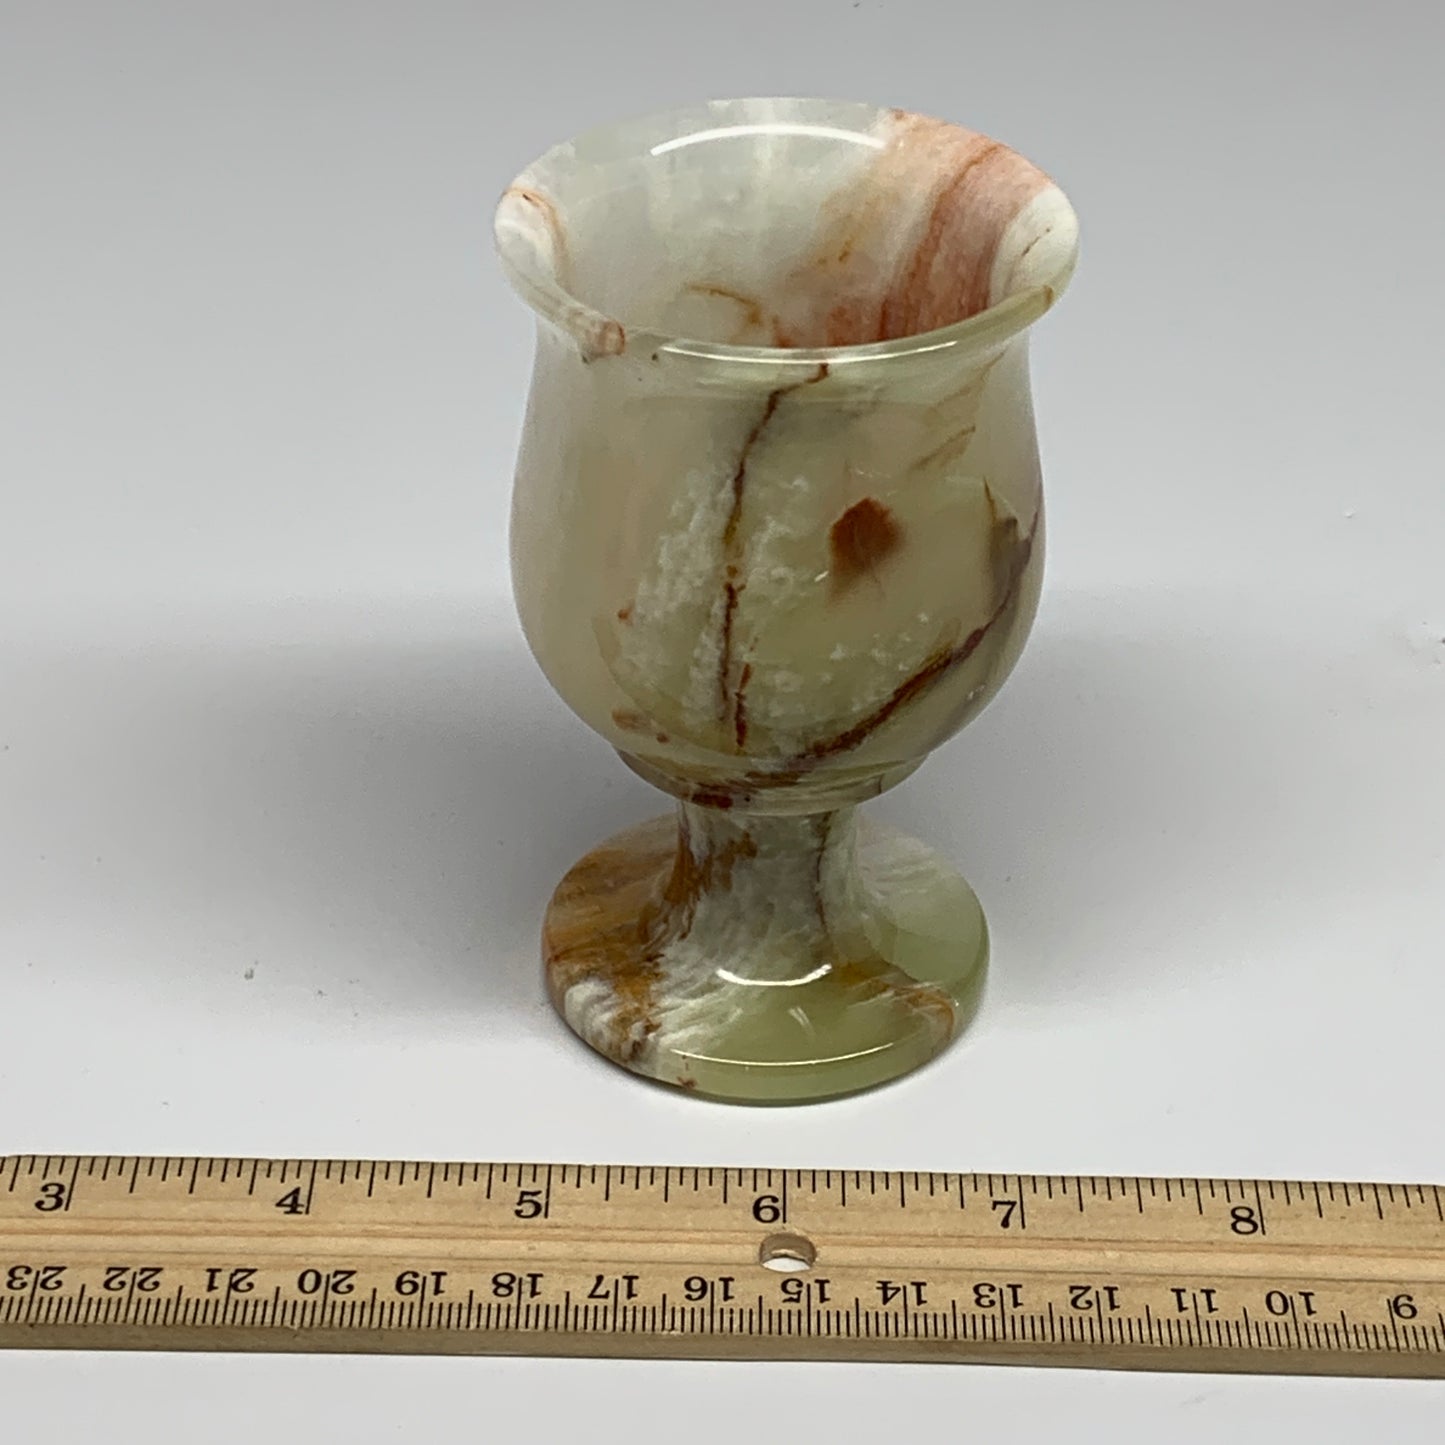 203g, 3.8"x2.3" Natural Green Onyx Cup Gemstone from Afghanistan, B31999